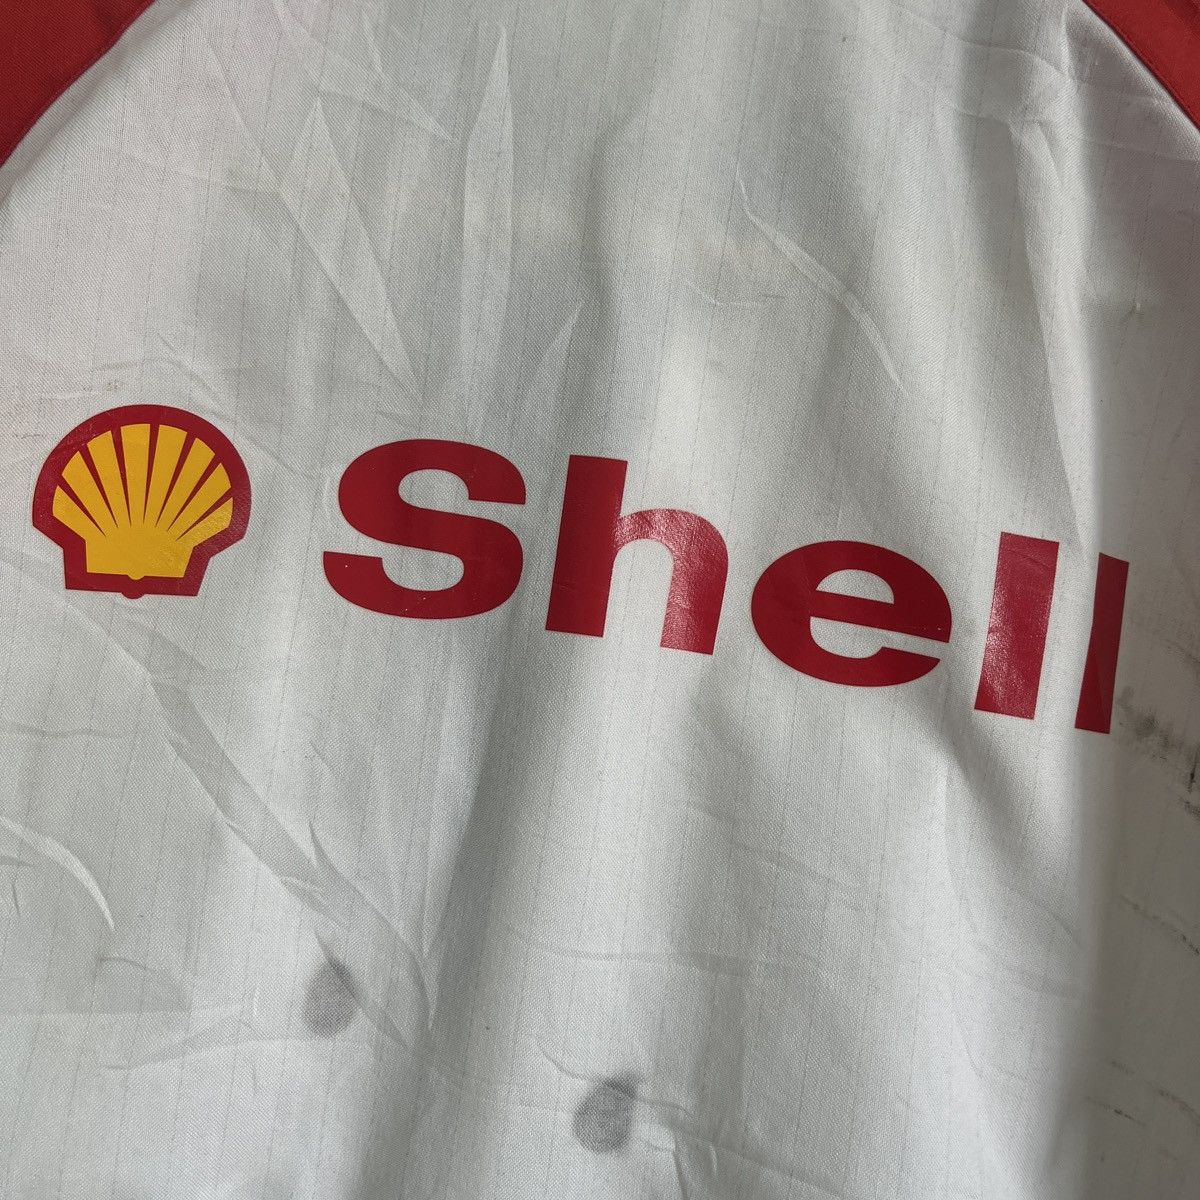 Vintage Shell Workers Uniform Shirts Japan - 13